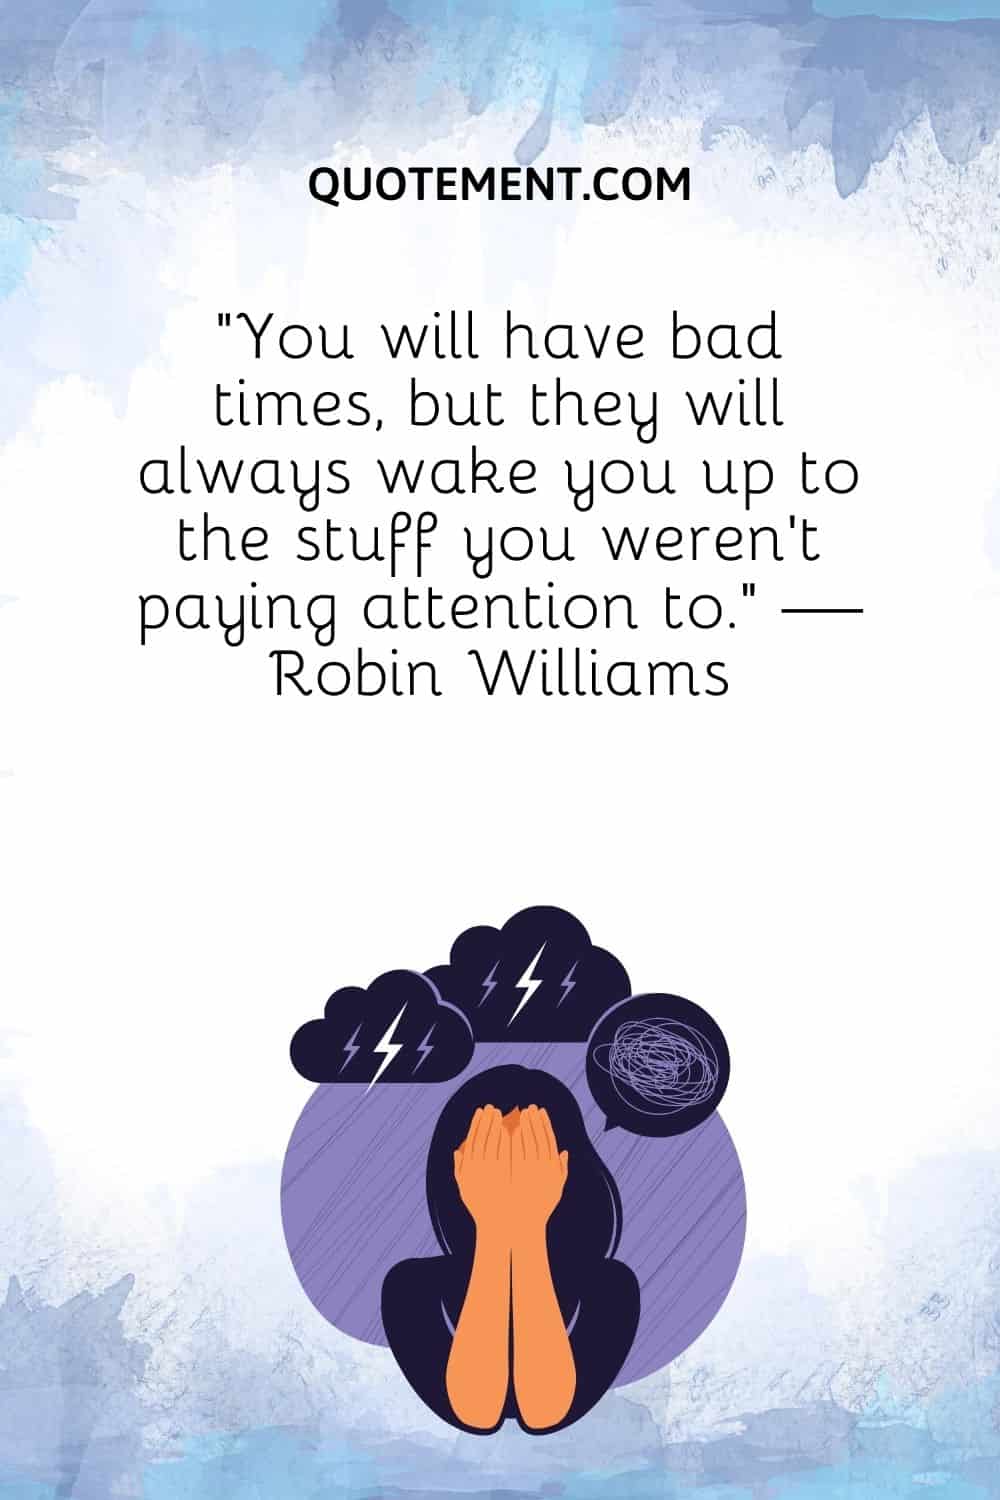 You will have bad times, but they will always wake you up to the stuff you weren't paying attention to